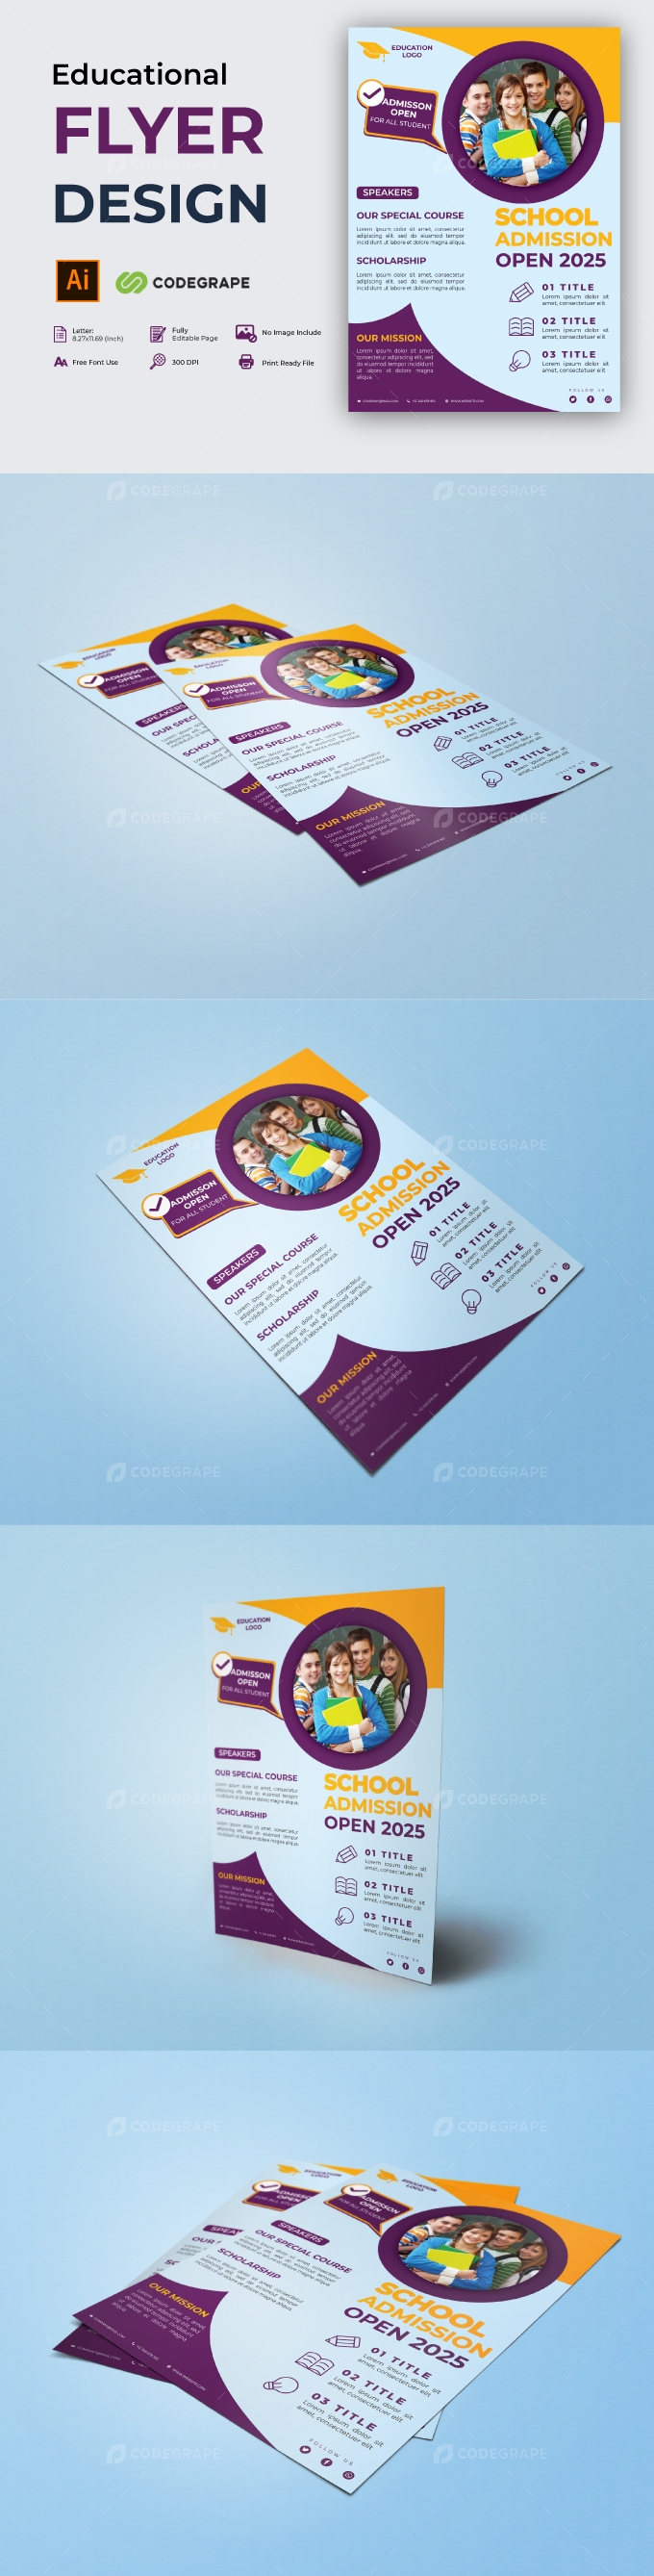 Educational Flyer Template